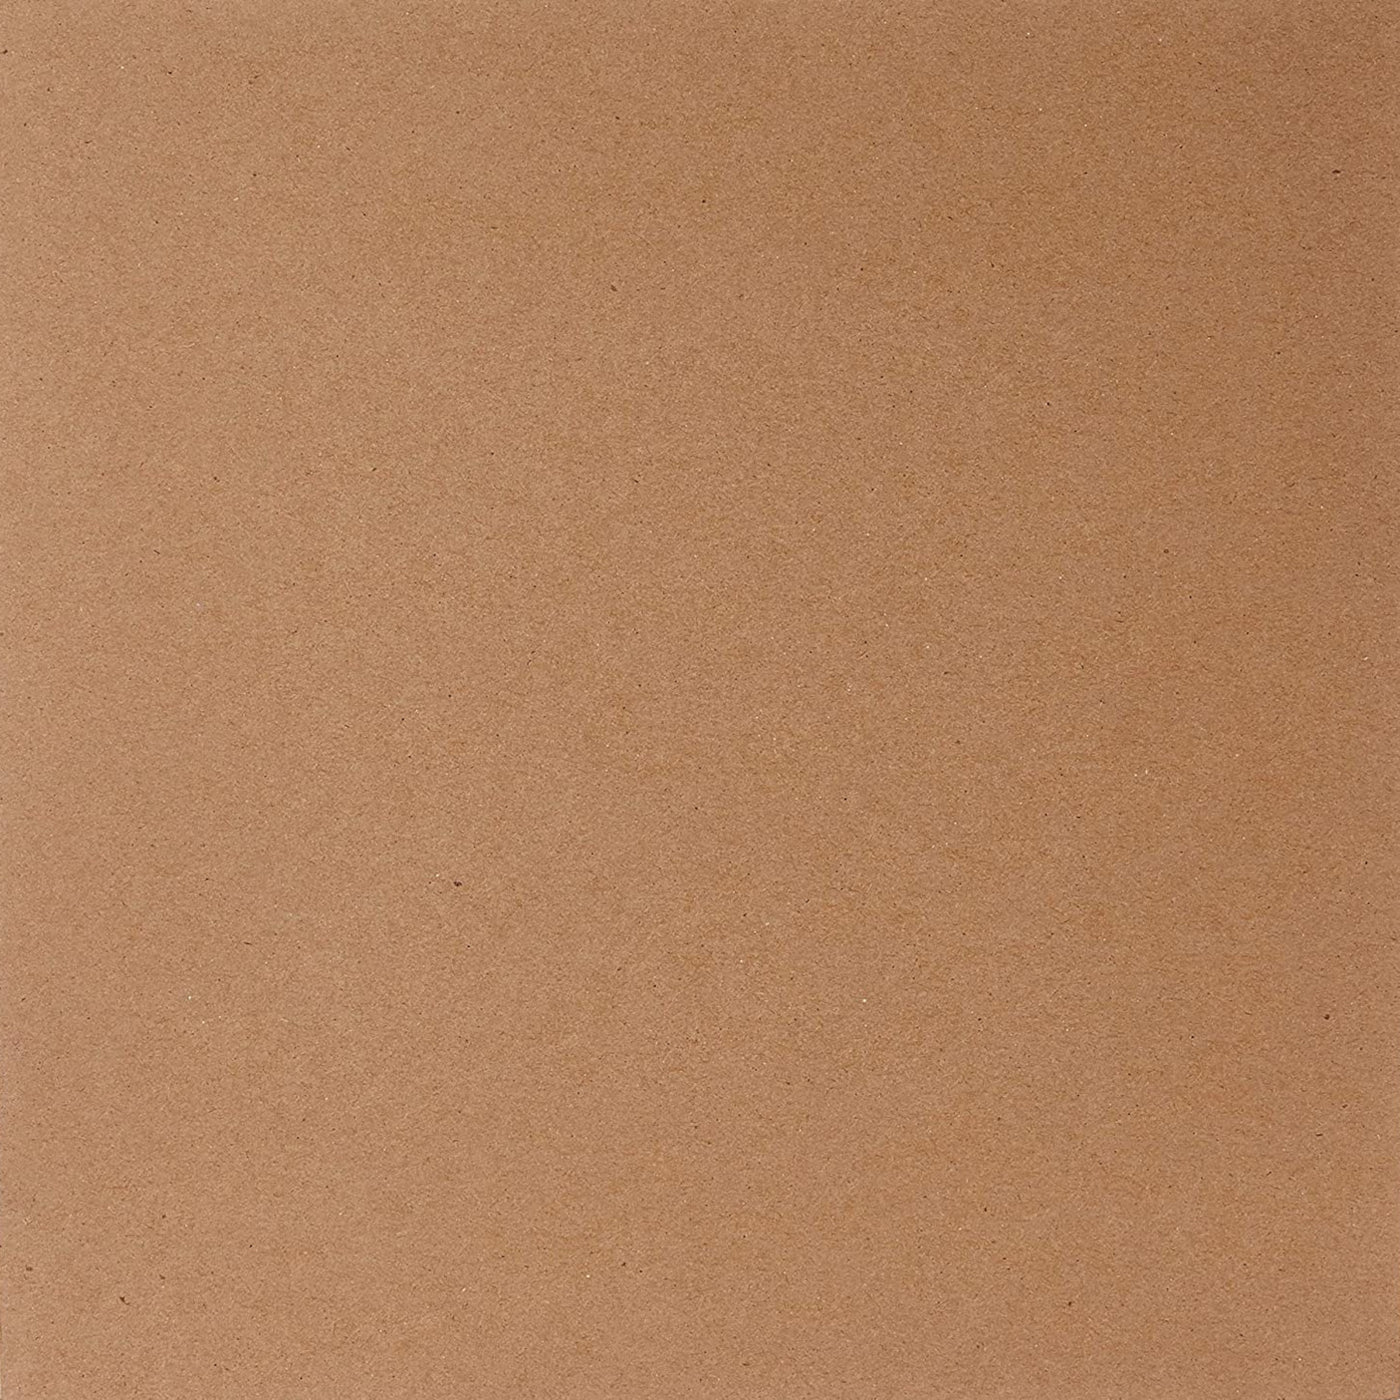 Chipboard Sheets 8.5 x 11 inch - 100 Sheets of 30 Point Brown